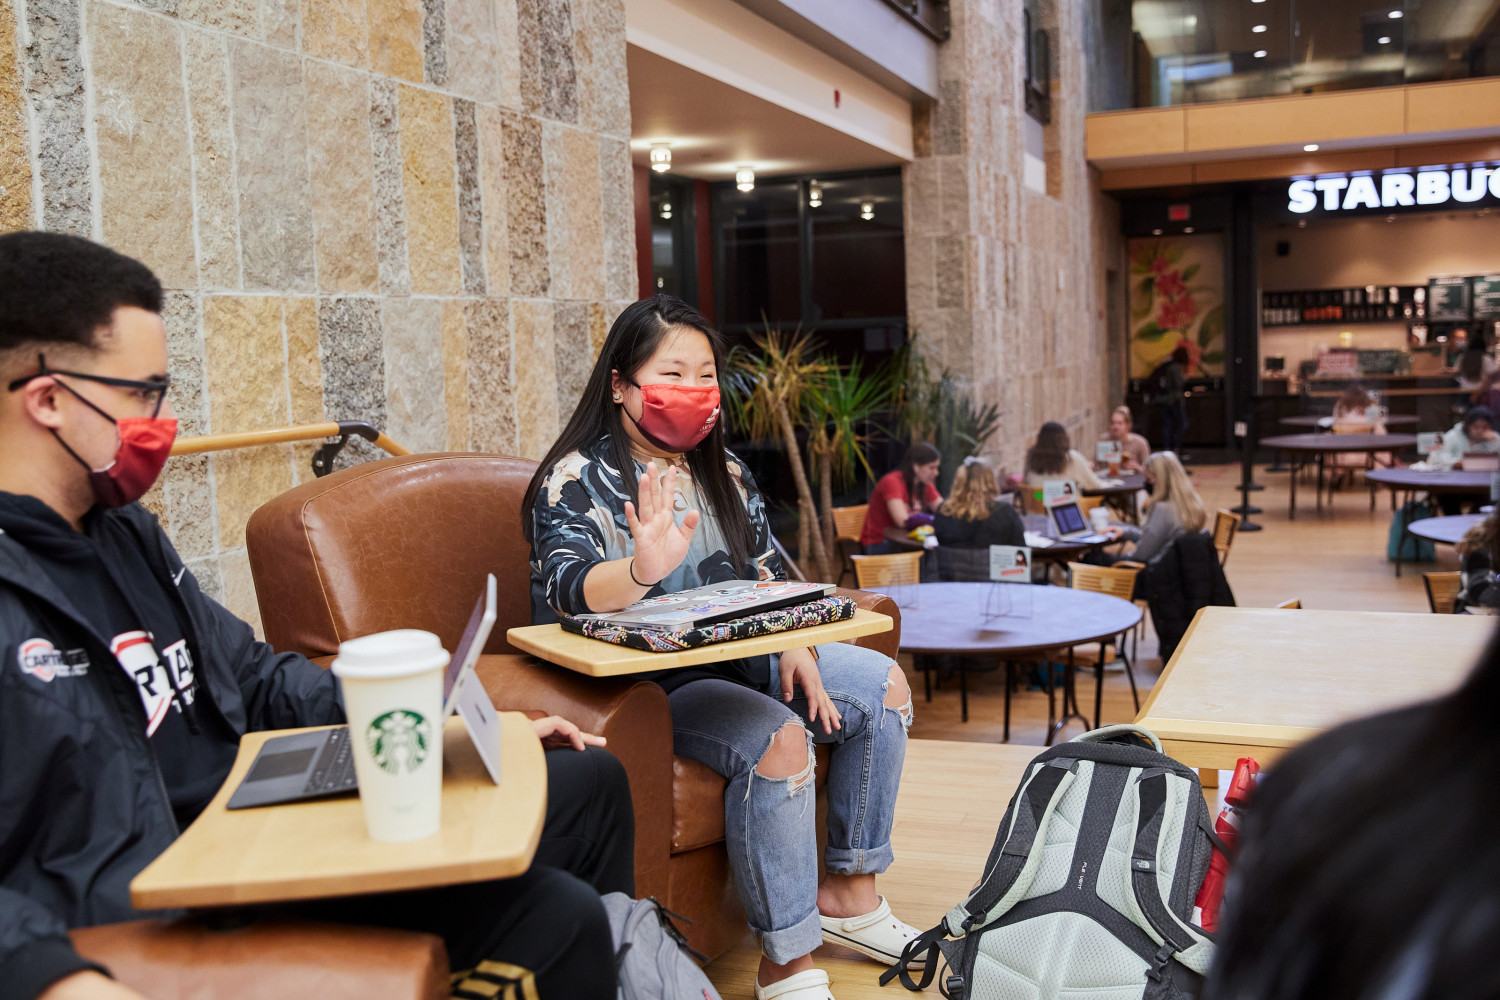 Carthage students gather at Starbucks in the A.W. Clausen Center for World Business.